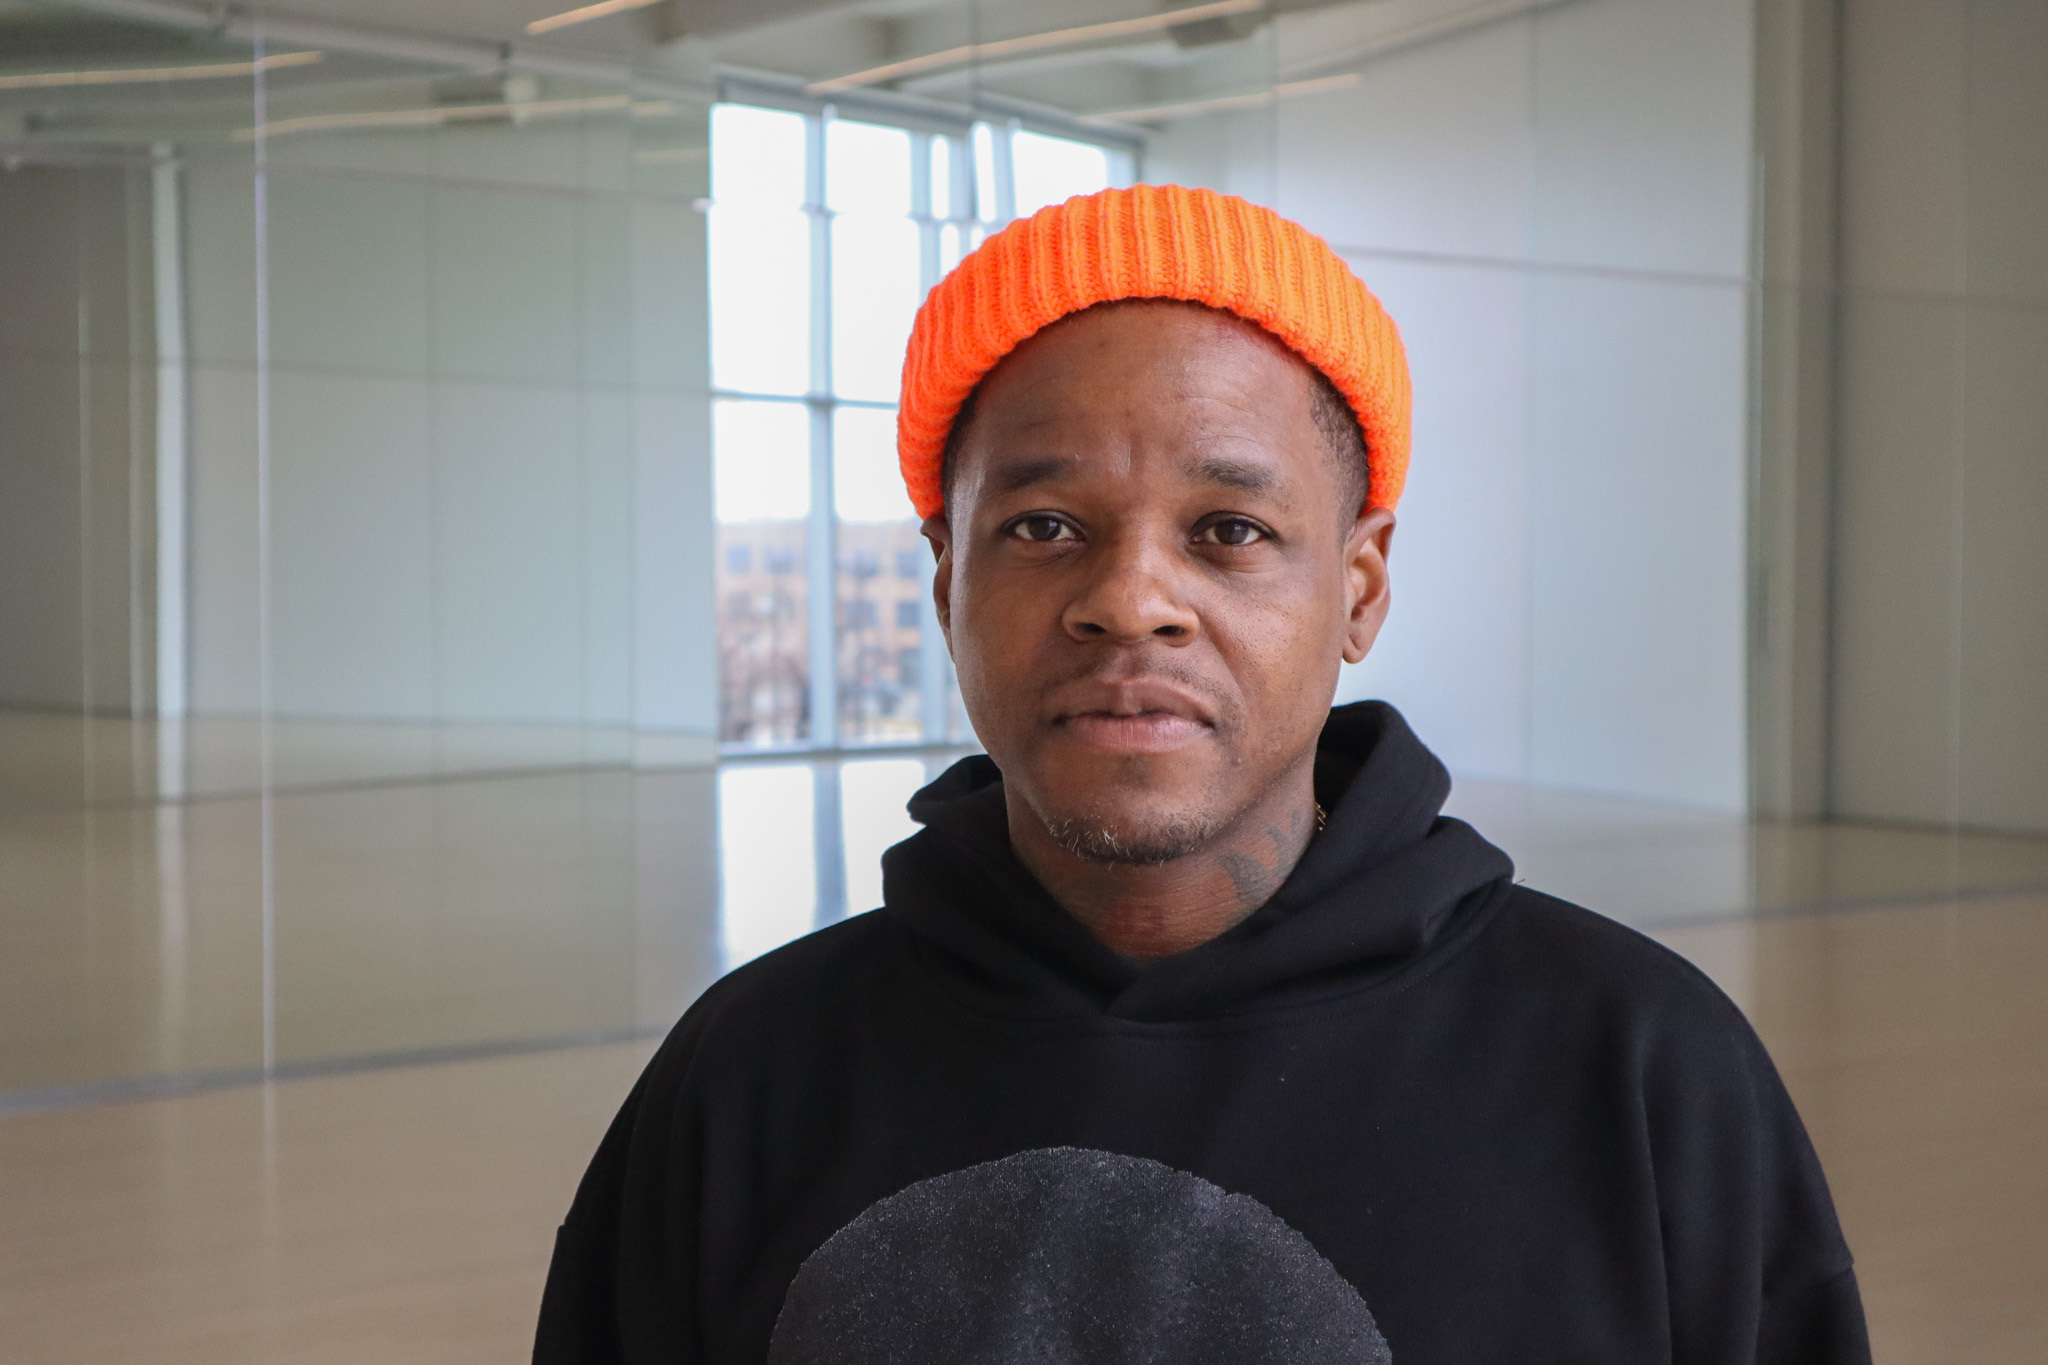 A Black man dressed in a black sweater and wearing an orange beanie stands in a room with mirrors.